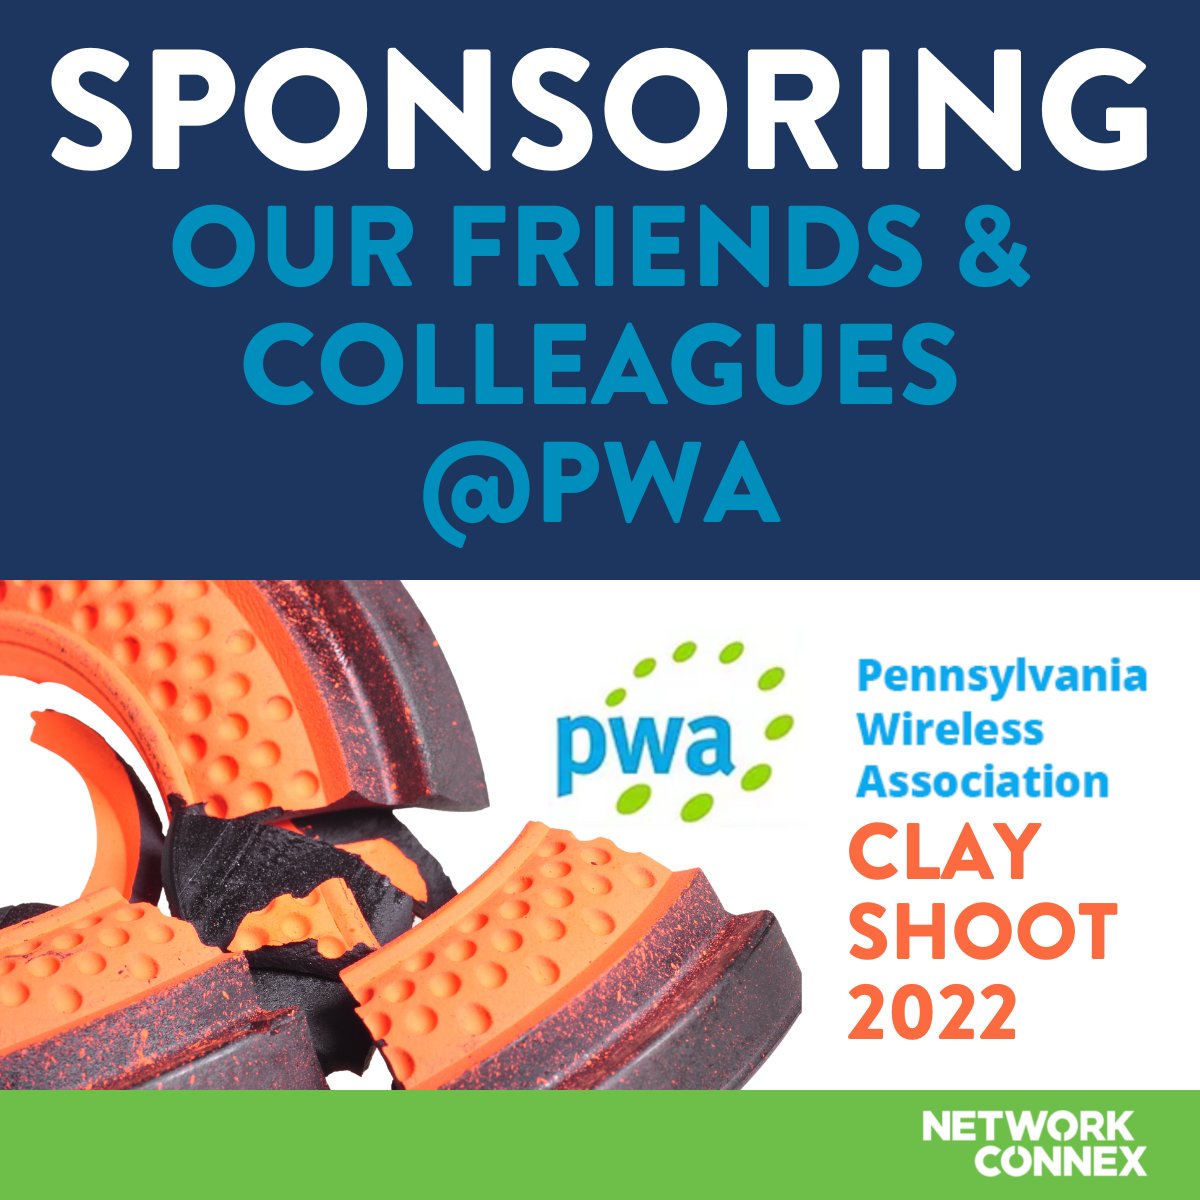 Who's up for a little sport clay shooting? We're sending out our best foursome for the  Clay Shooting tournament today! See you there..... networkconnex.com

#wirelessinfrastructure #wirelessengineering #wirelessconstruction